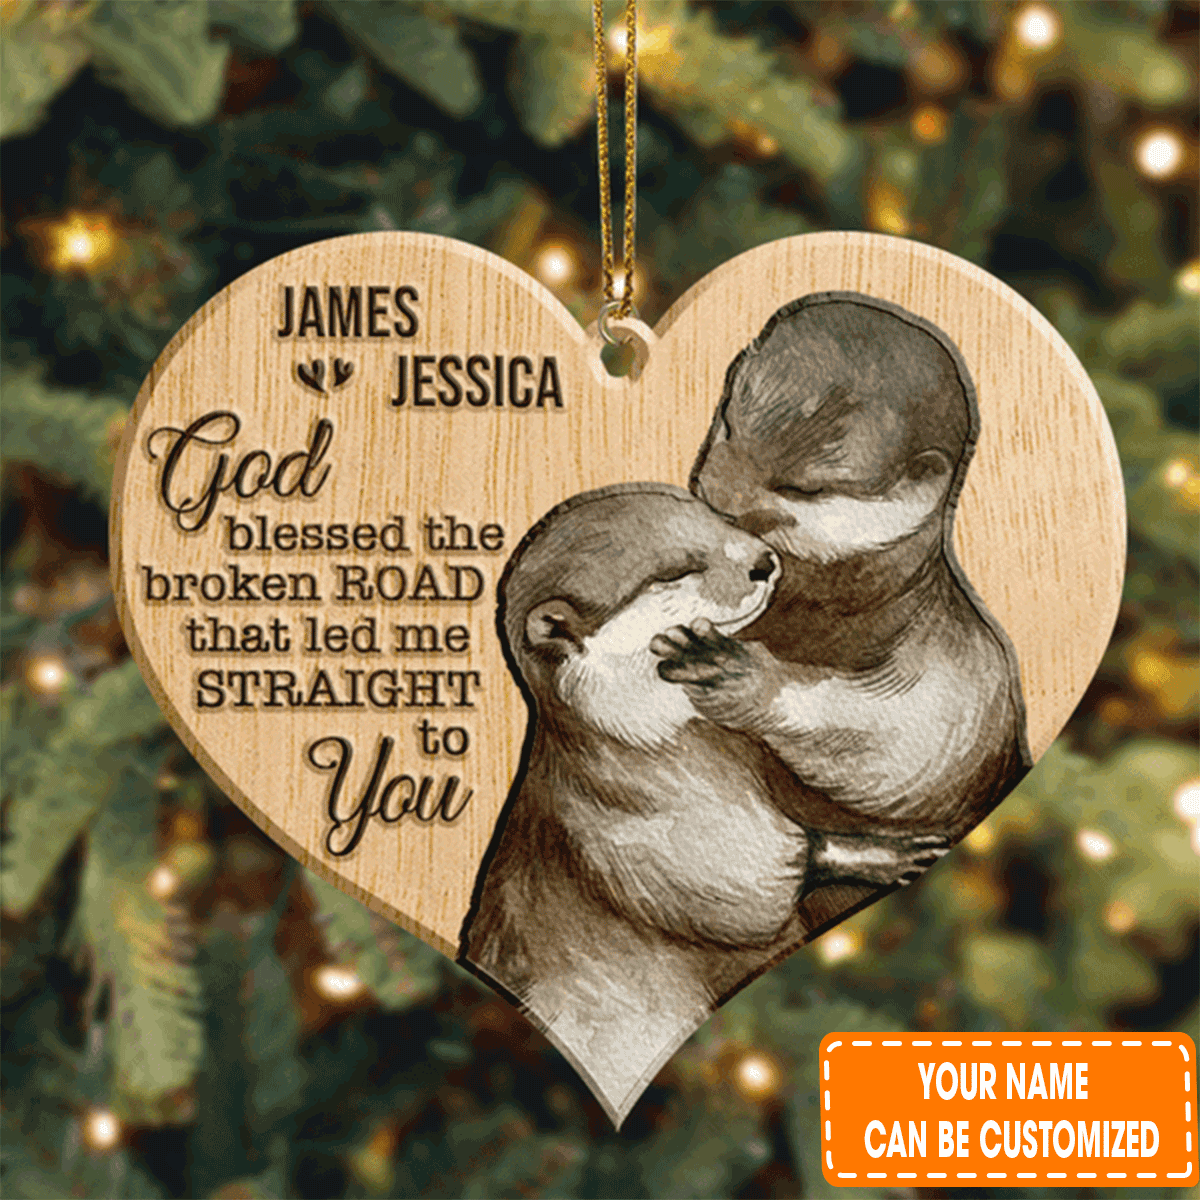 Custom Jesus Acrylic Ornament, Personalized Cuddling Otter Couple God Blessed Acrylic Ornament For Christian, Holiday Decor